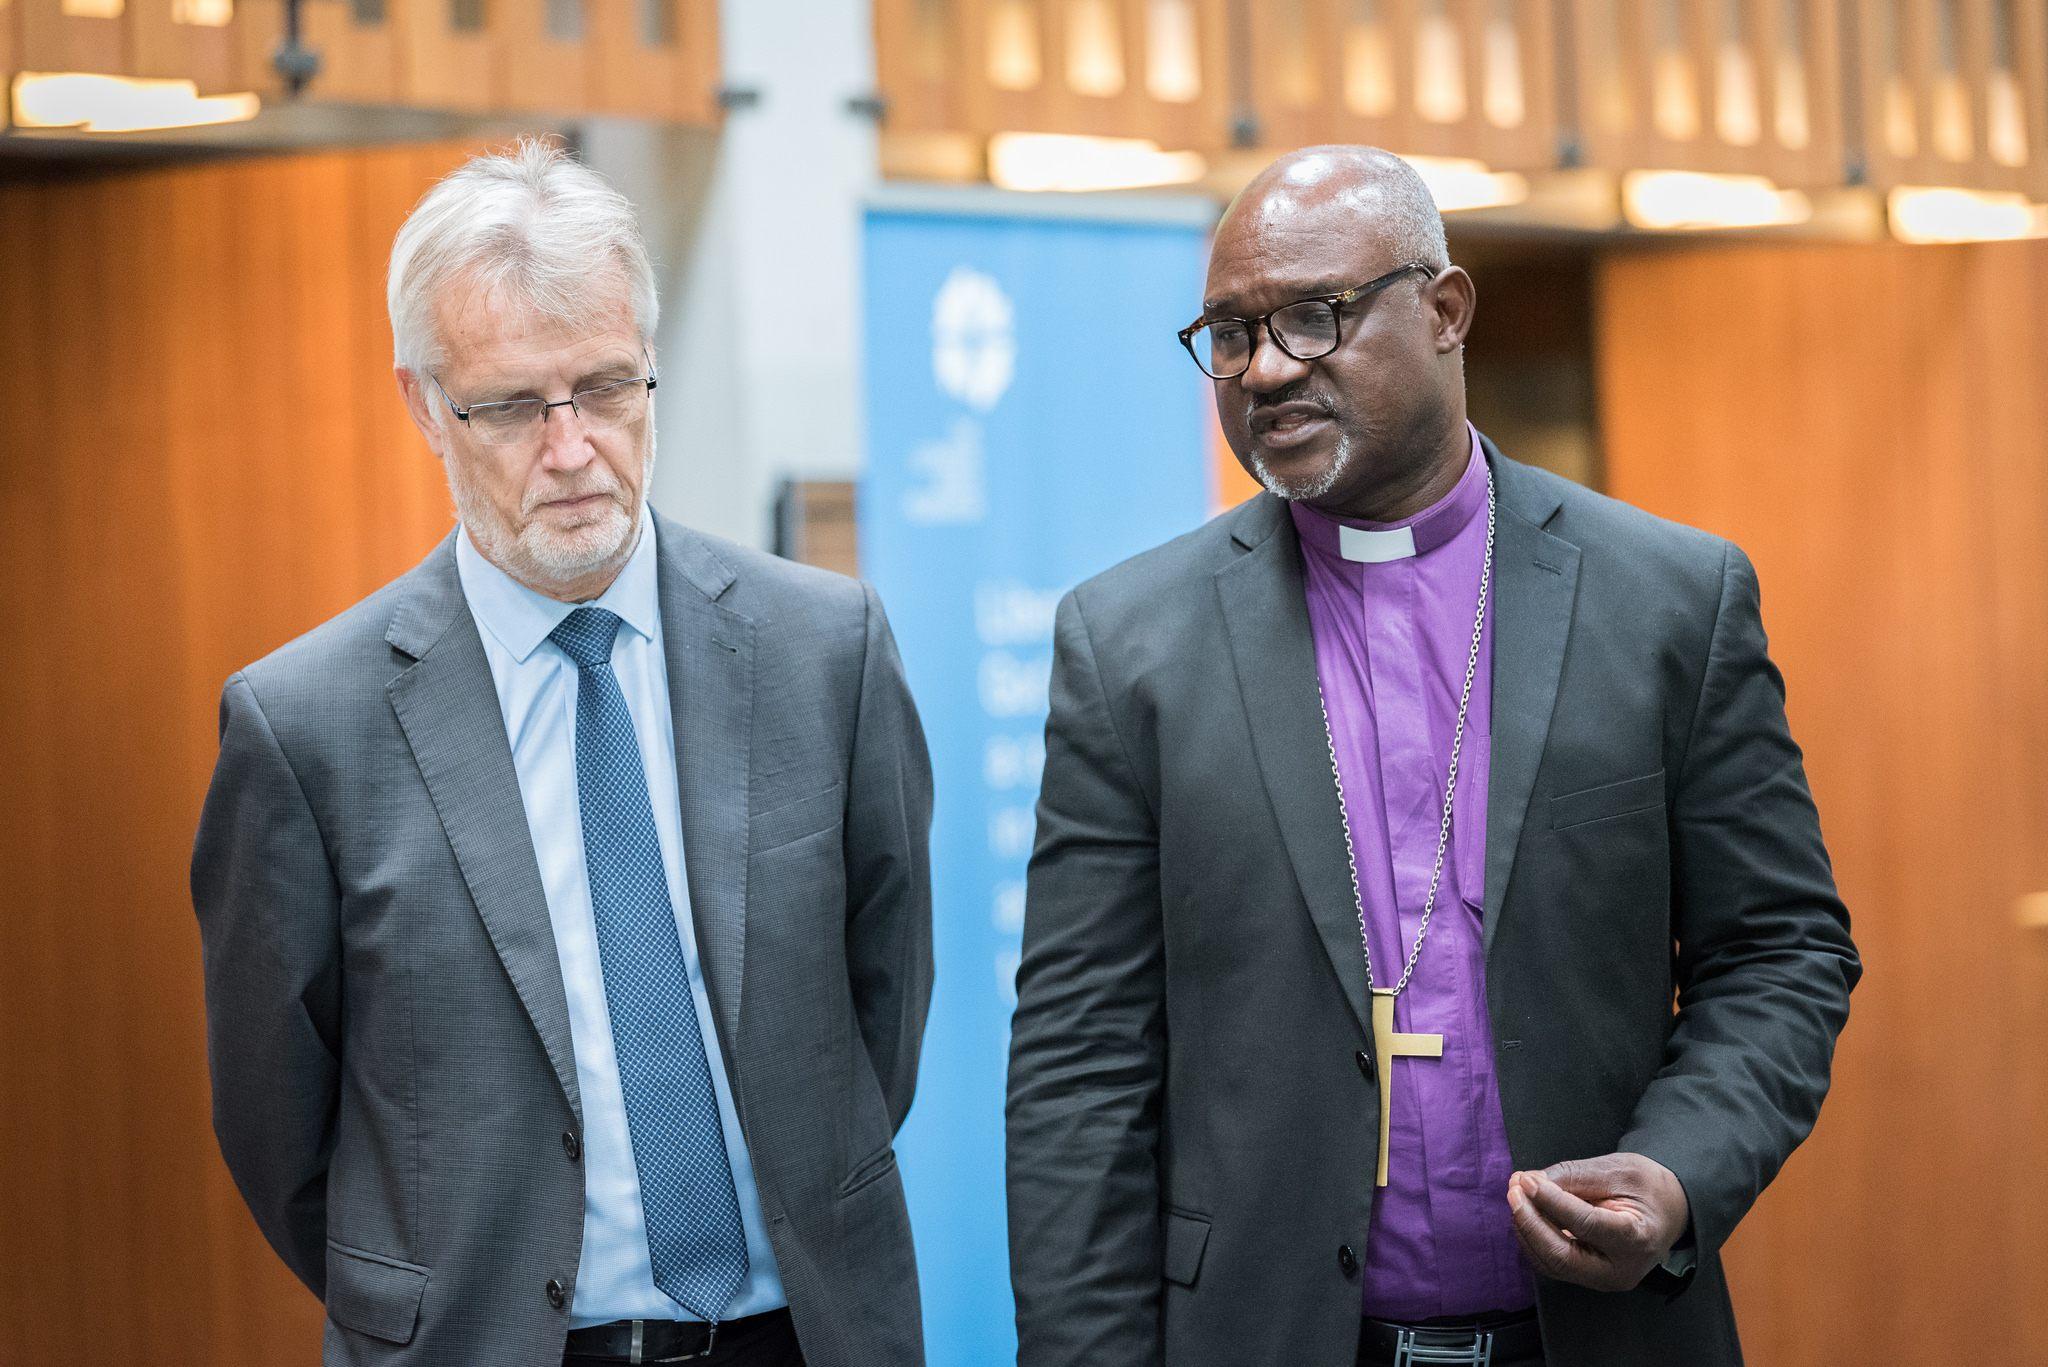 The LWF has urged members of the global community of states to mark the 70th anniversary of the Universal Declaration of Human Rights today by reaffirming commitment to the declaration and to safeguarding freedom, justice and peace in the world. LWF general secretary Rev. Dr Martin Junge (left) and LWF President Archbishop Musa Panti Filibus (right). Photo: LWF/Albin Hillert